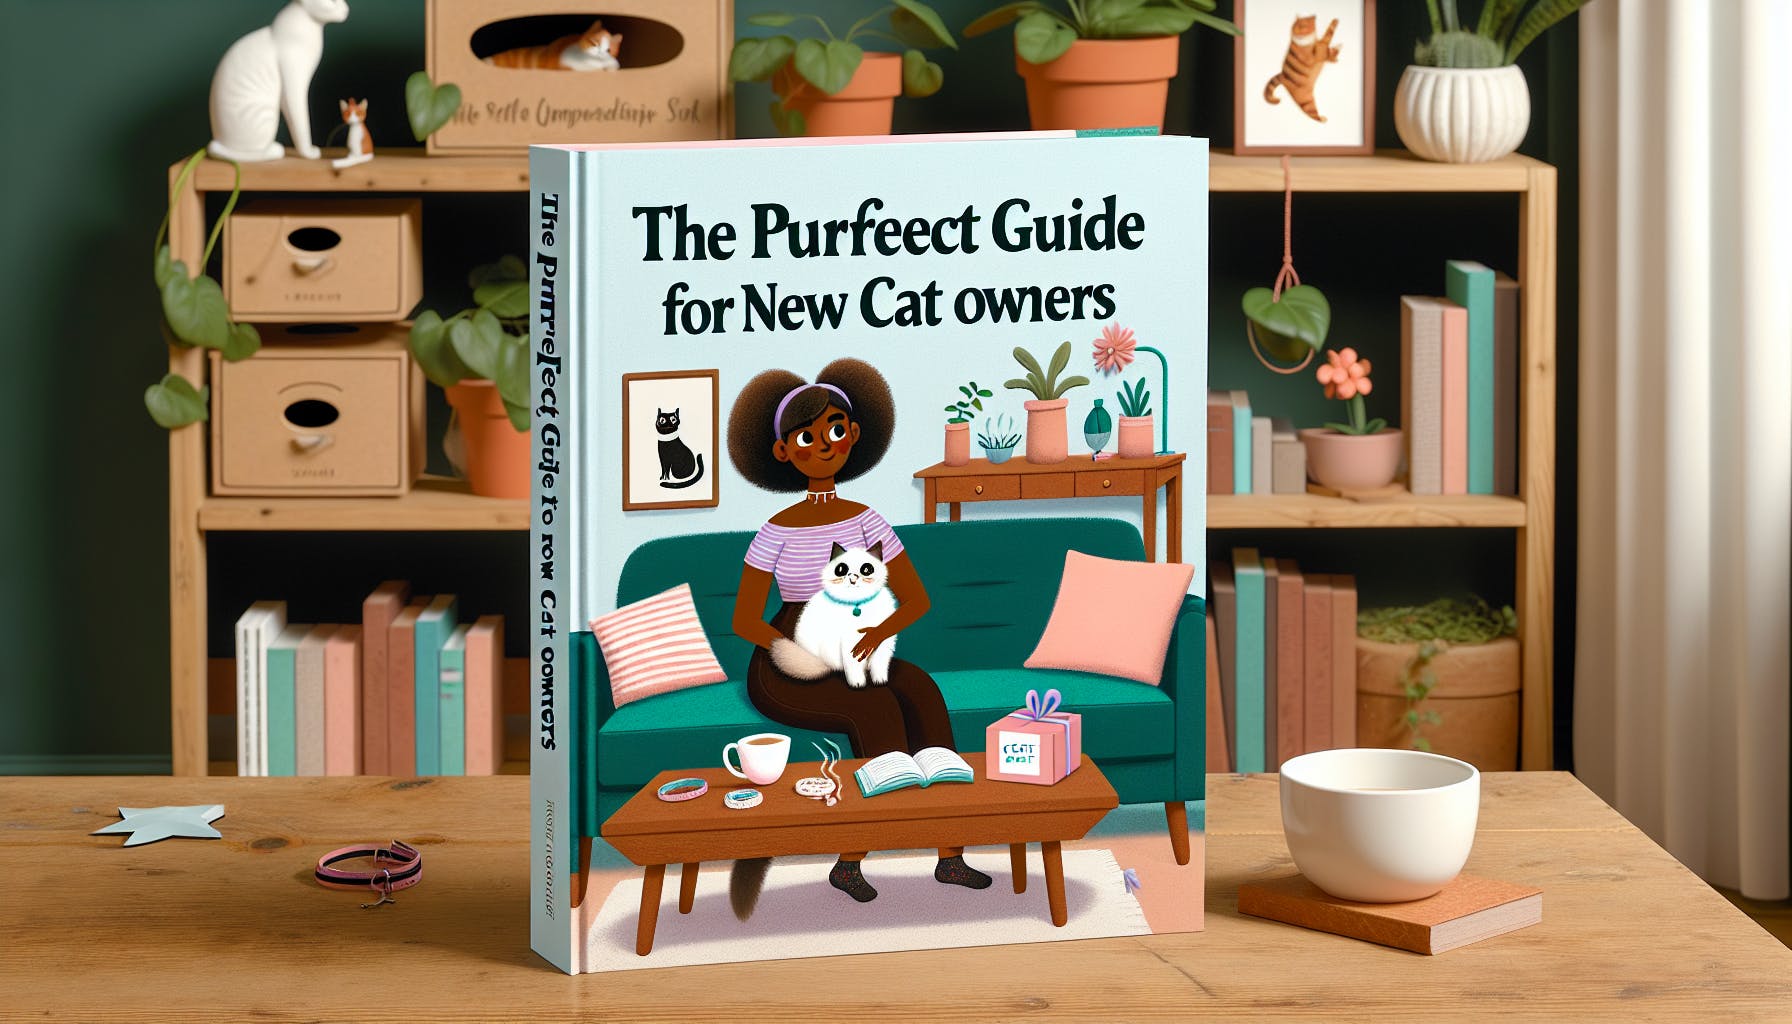 The Purrfect Guide for New Cat Owners